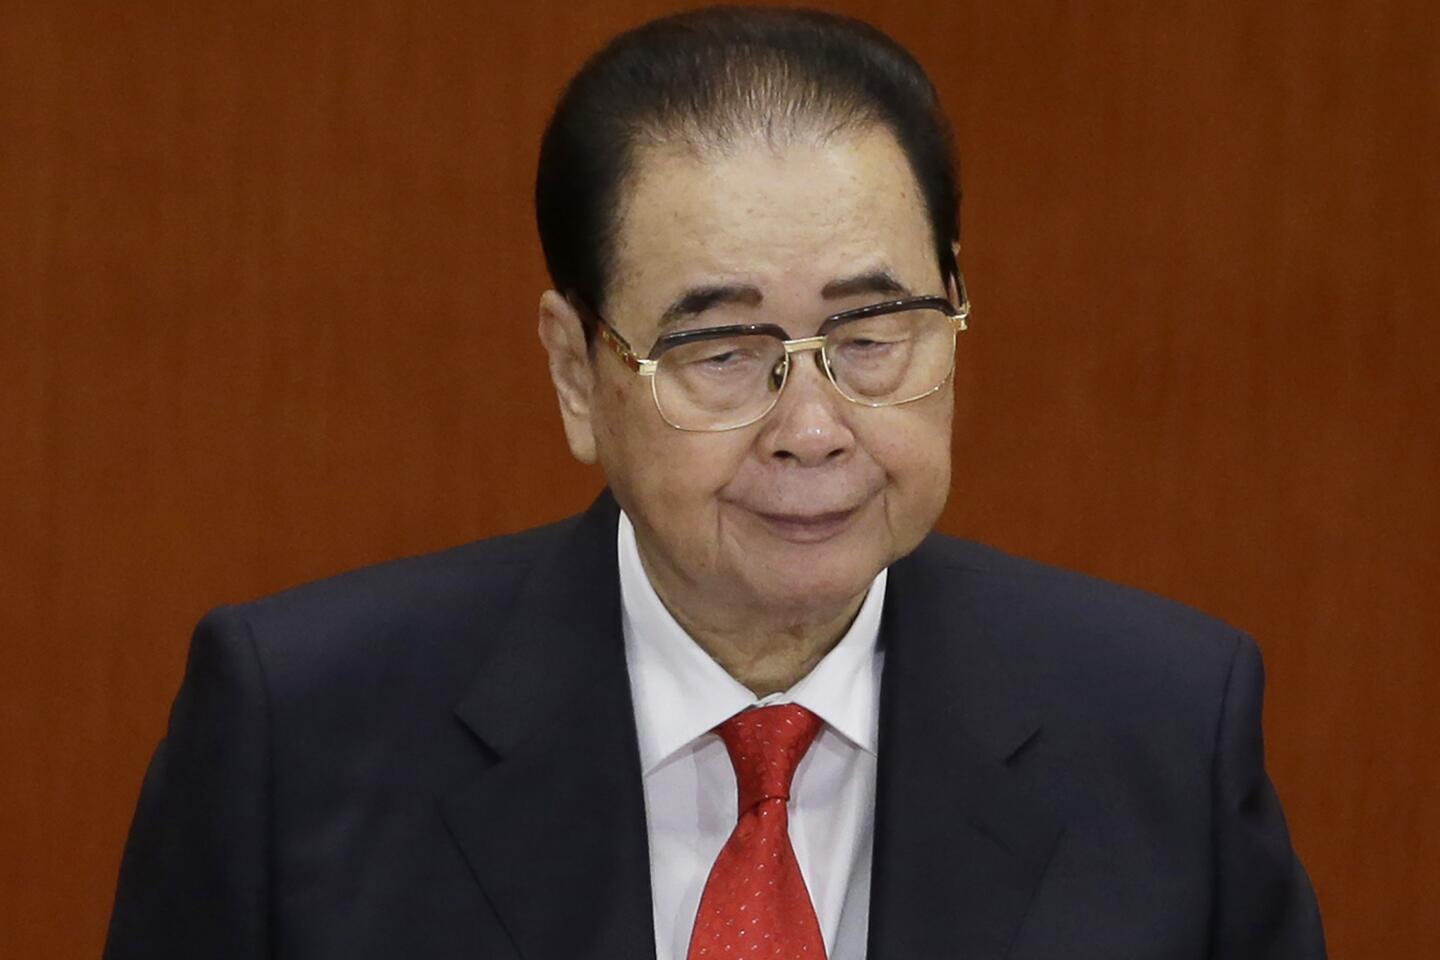 Hard-line Chinese premier Li Peng was best-known for ending the 1989 Tiananmen Square protests with a bloody crackdown by troops. A keen political infighter, he spent two decades at the pinnacle of power before retiring in 2002, leaving a legacy of prolonged economic growth and authoritarian control. He was 90.